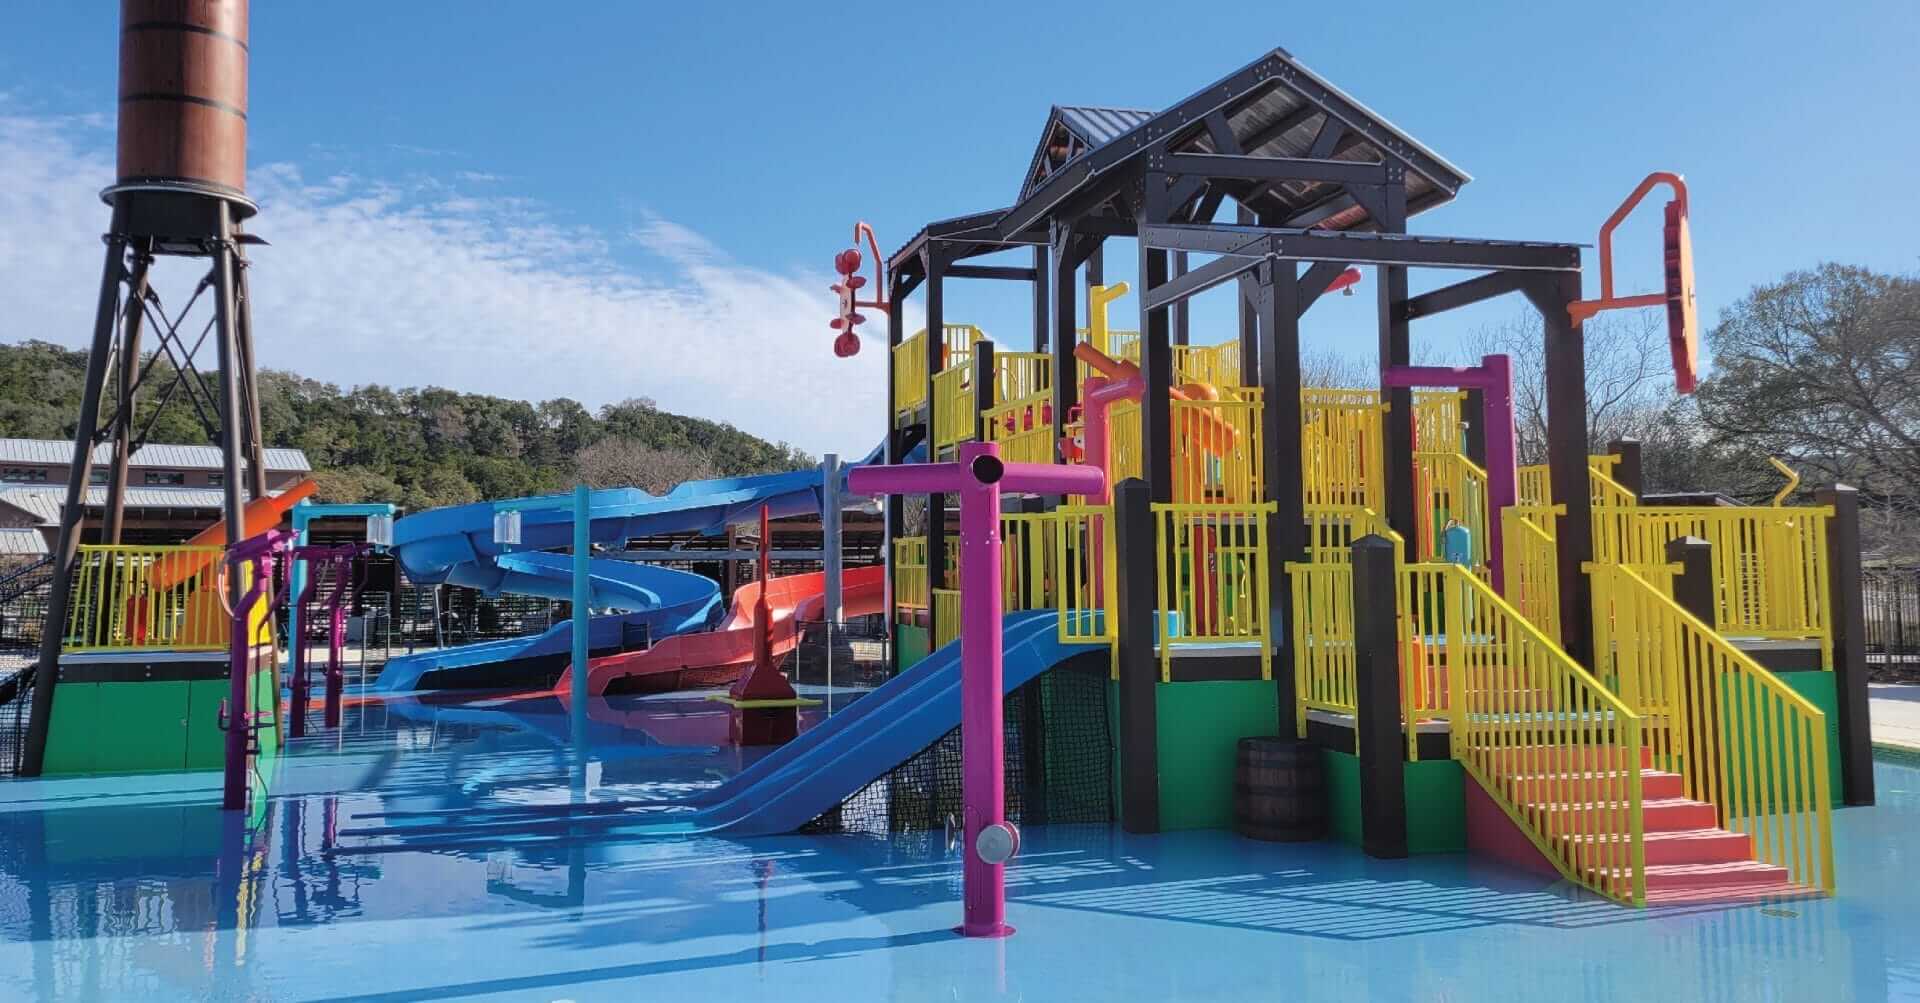 A shot of our water play structure in New Braunfels, Texas.